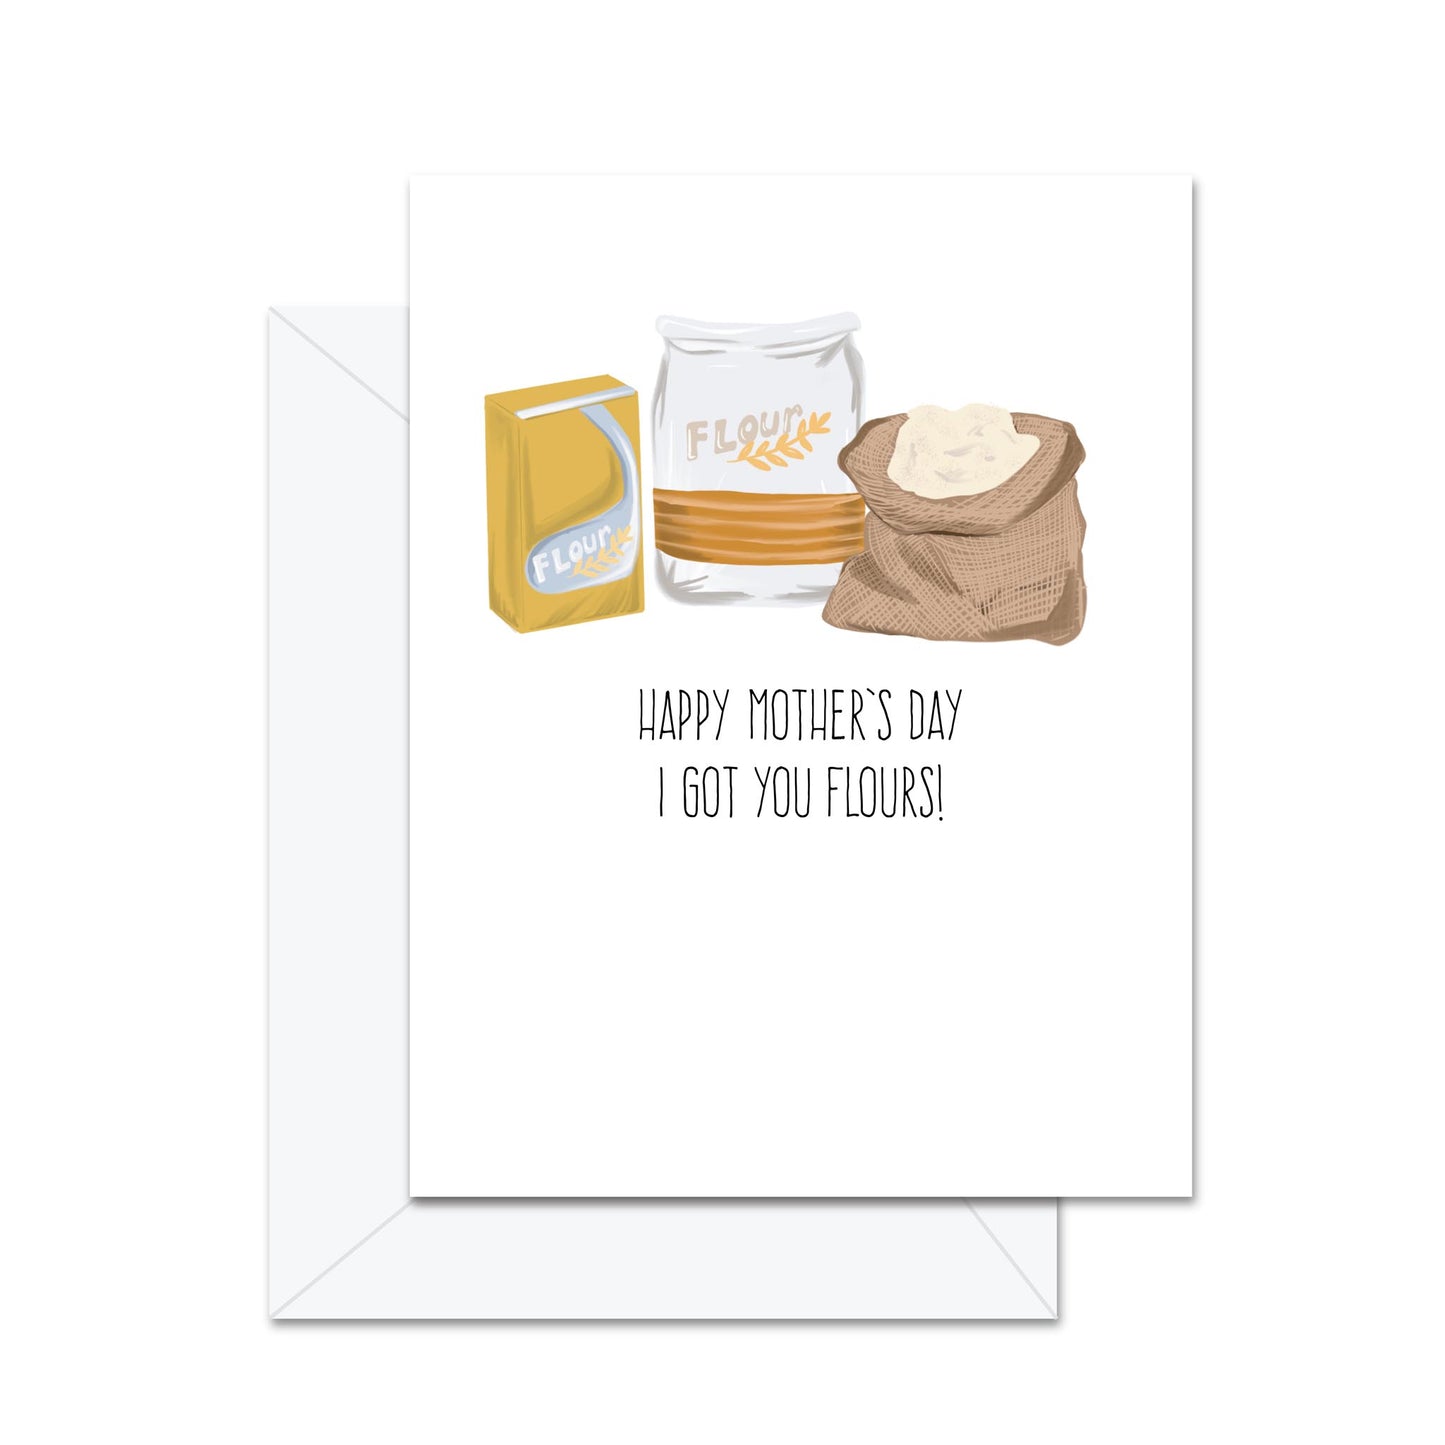 Happy Mother's Day I Got You Flours! - Greeting Card